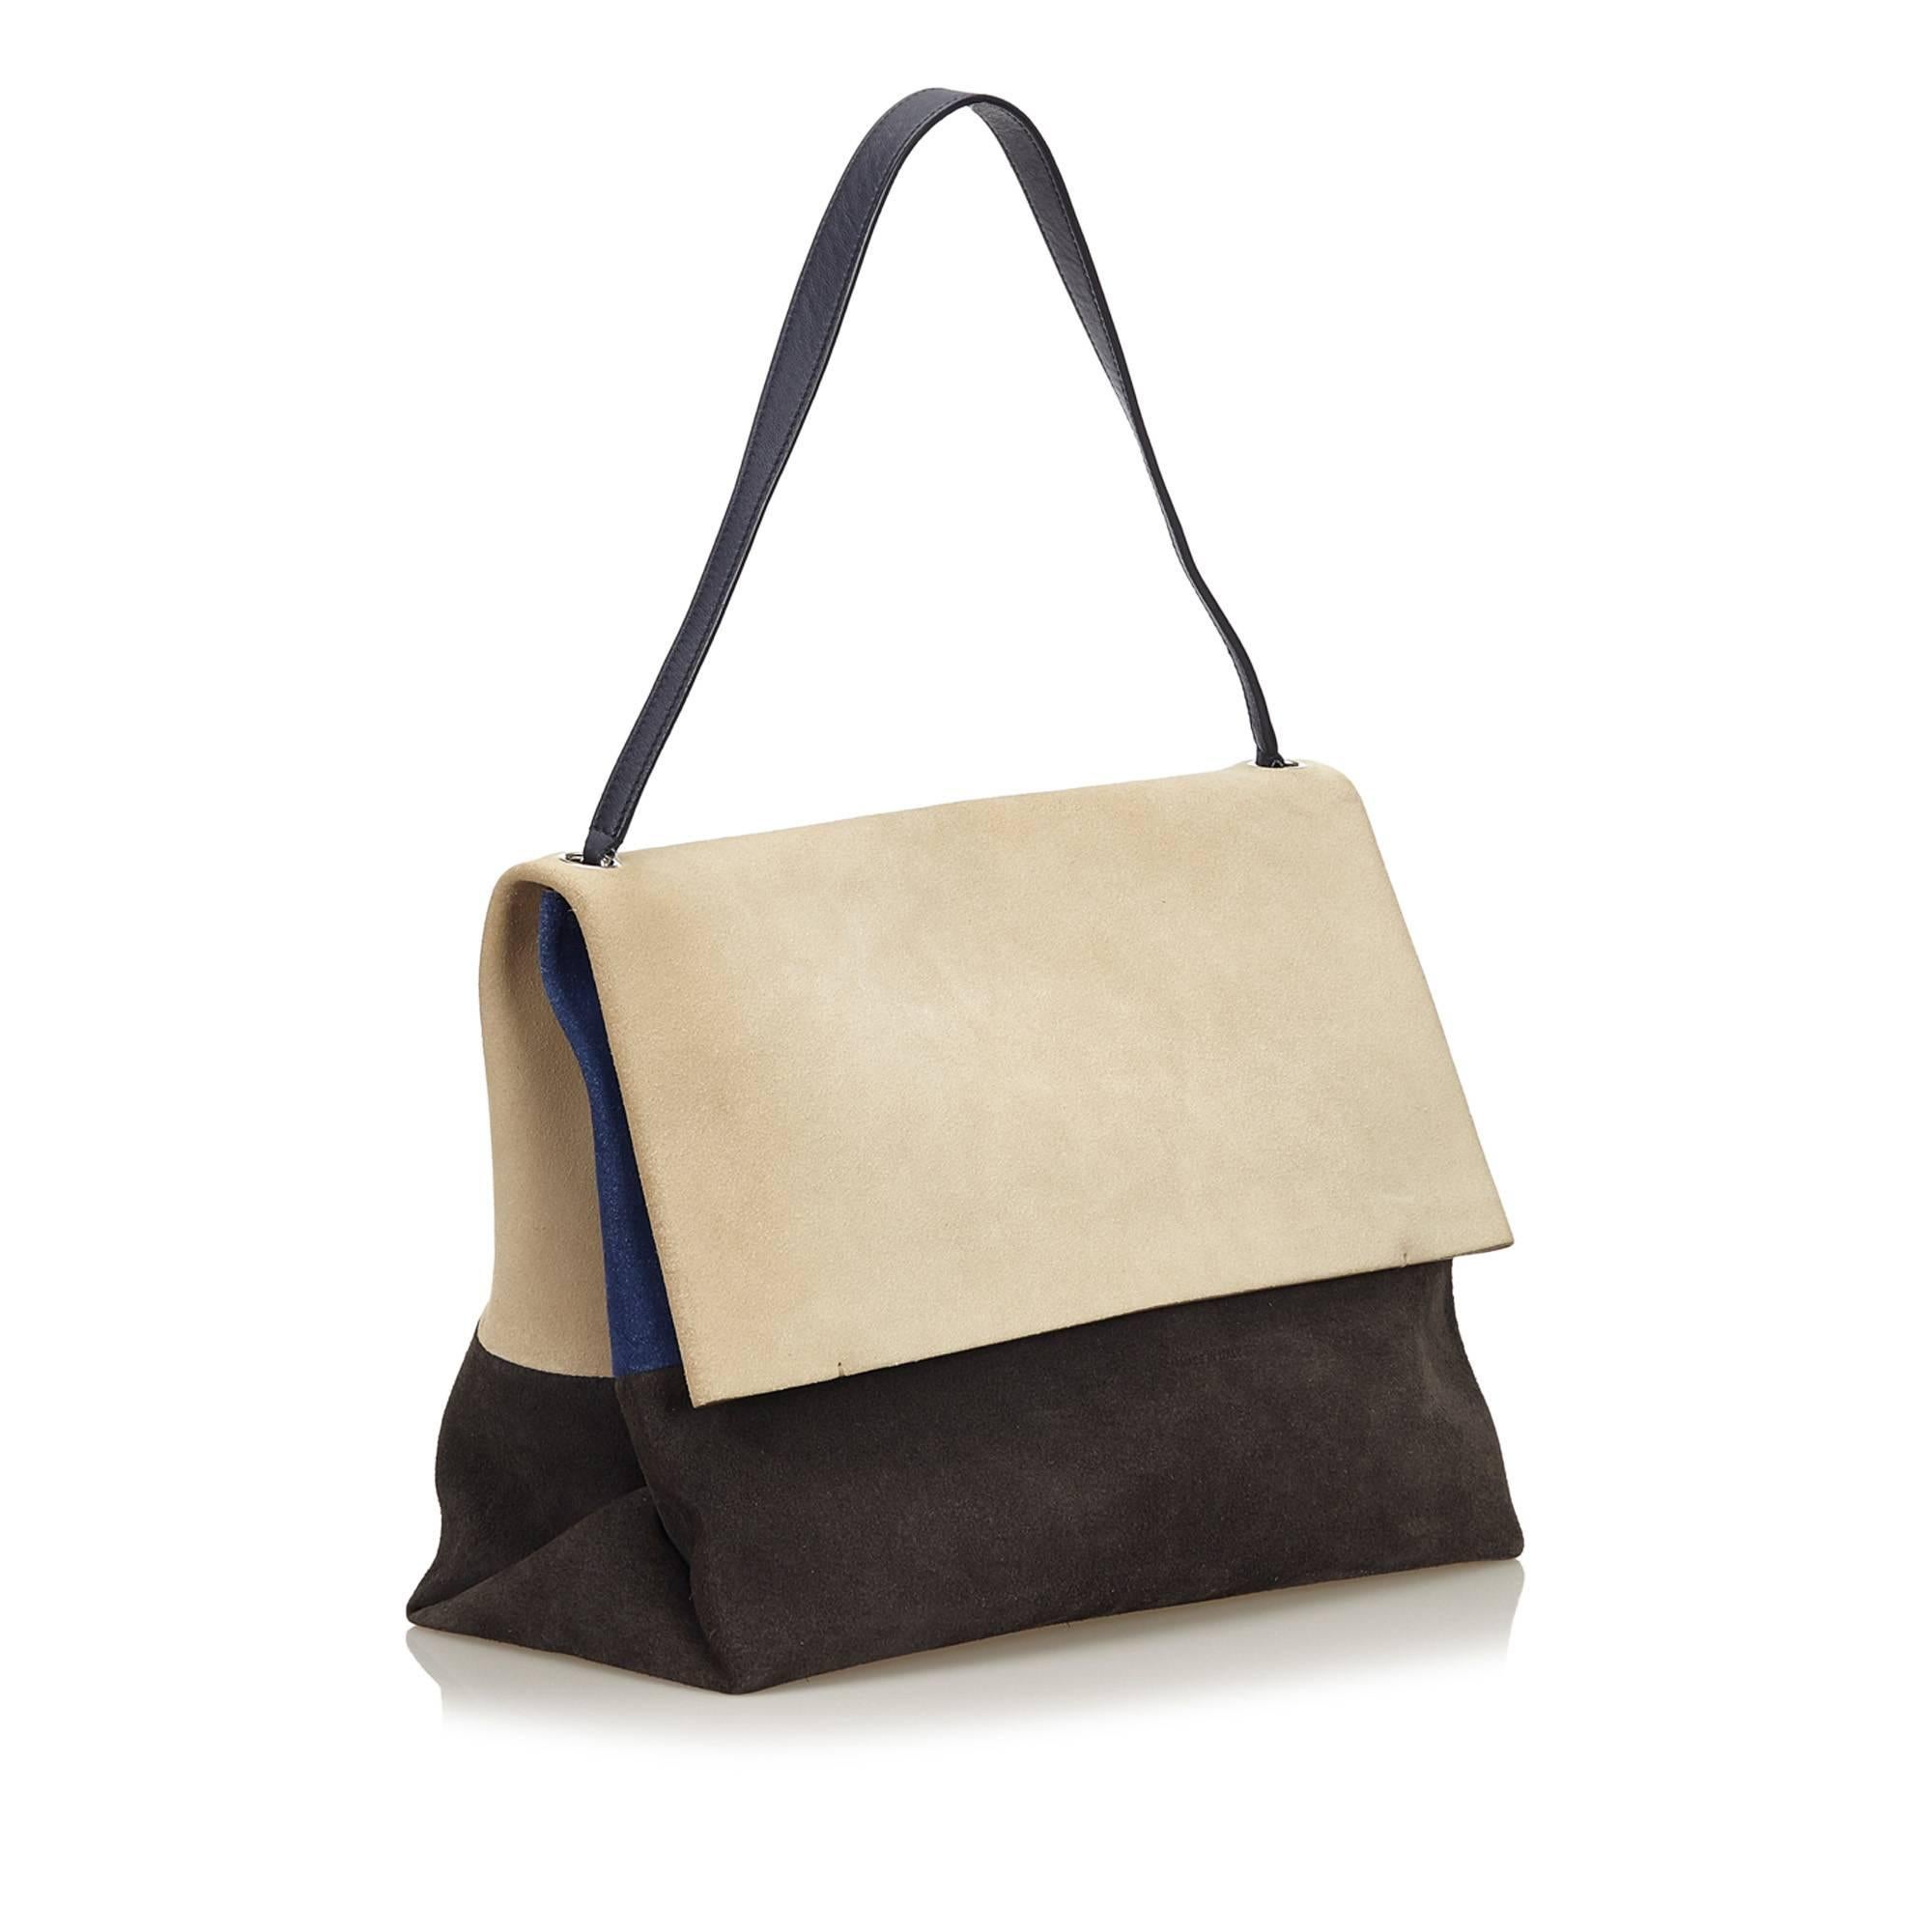 The All Soft features a suede body, a flat leather strap, and a front flap with a magnetic closure. 

It carries a B condition rating.

Dimensions: 
Length 35 cm
Width 27 cm
Depth 17 cm
Shoulder Drop 14 CM

Inclusions: Dust Bag, Pouch

Color: Brown